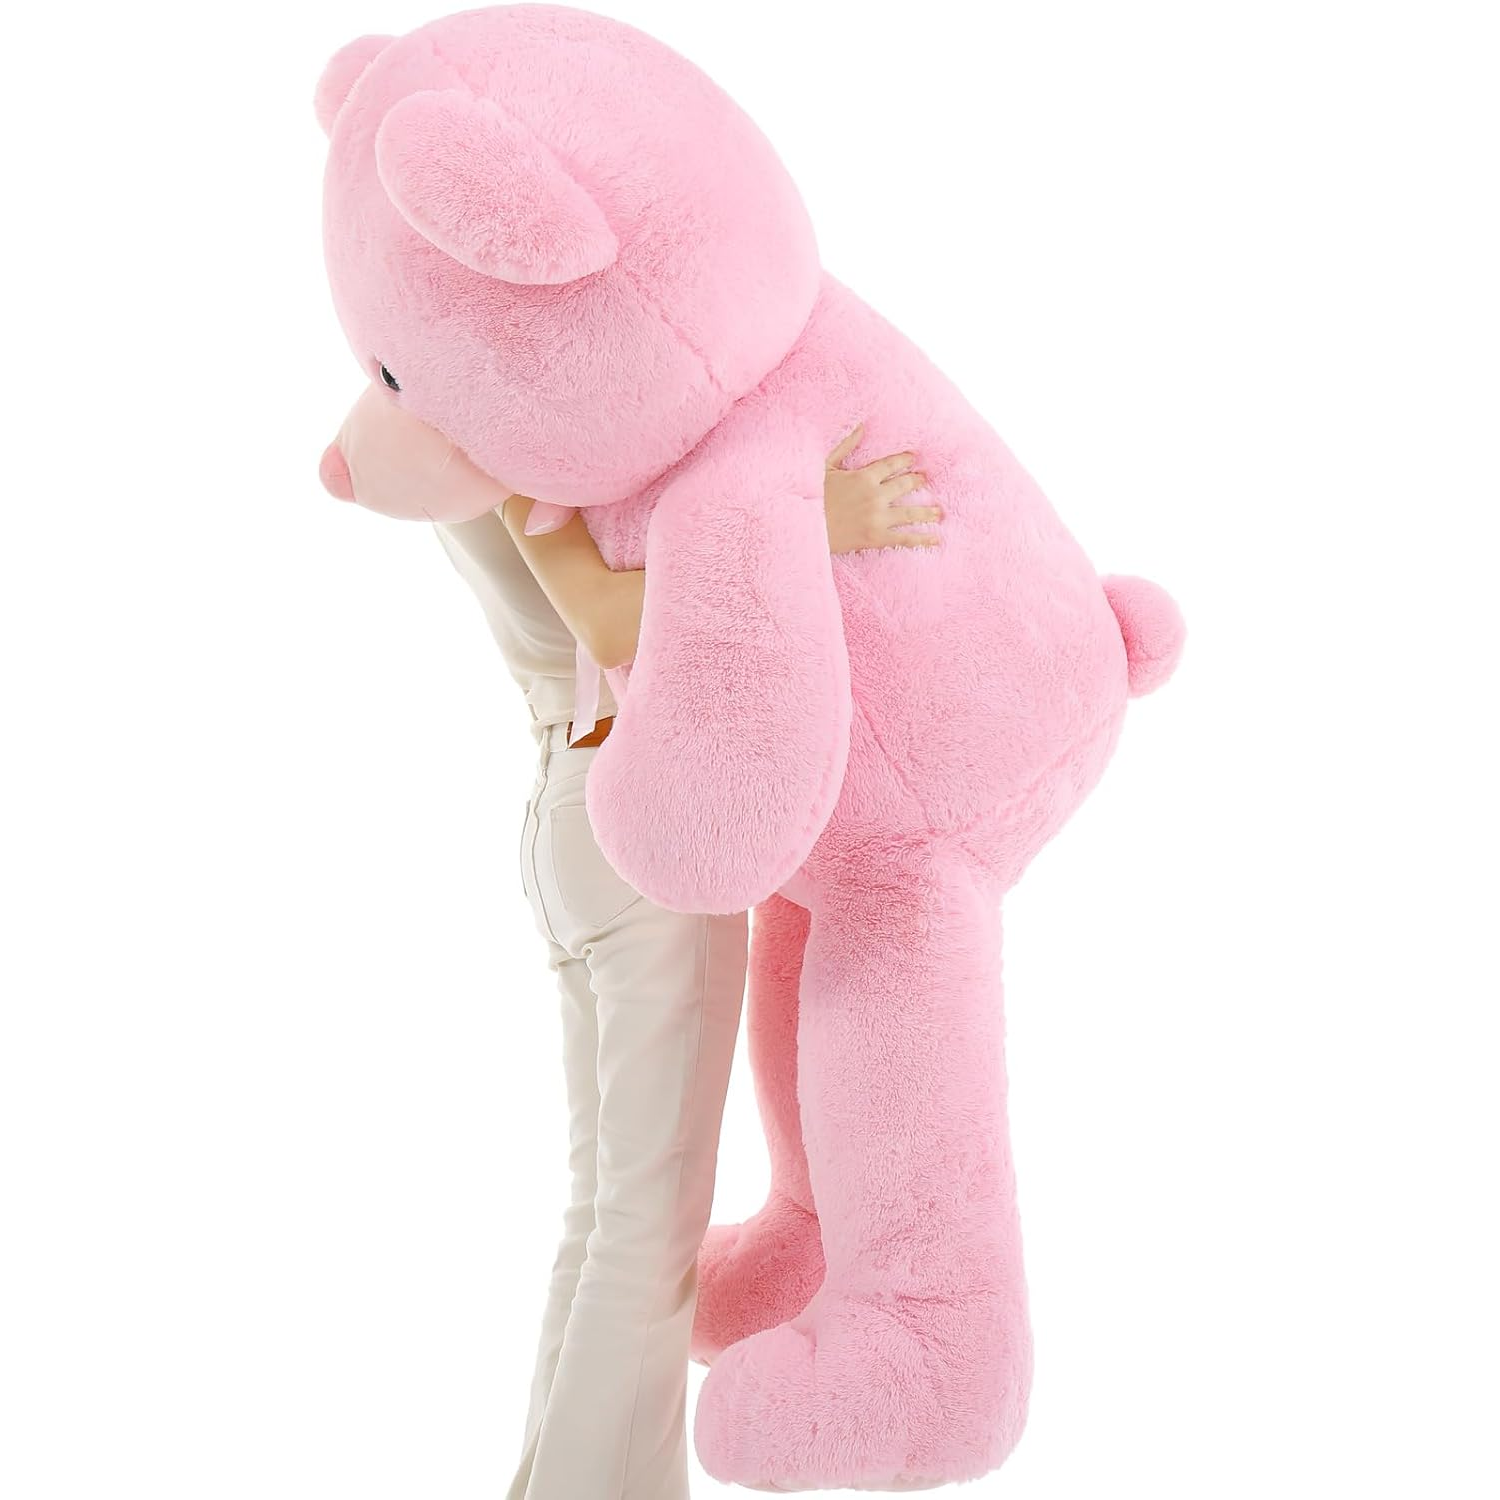 Teddy Bear Plush Toy, Light Brown/Brown/Pink/Beige, 35.4/48.82/59 Inches